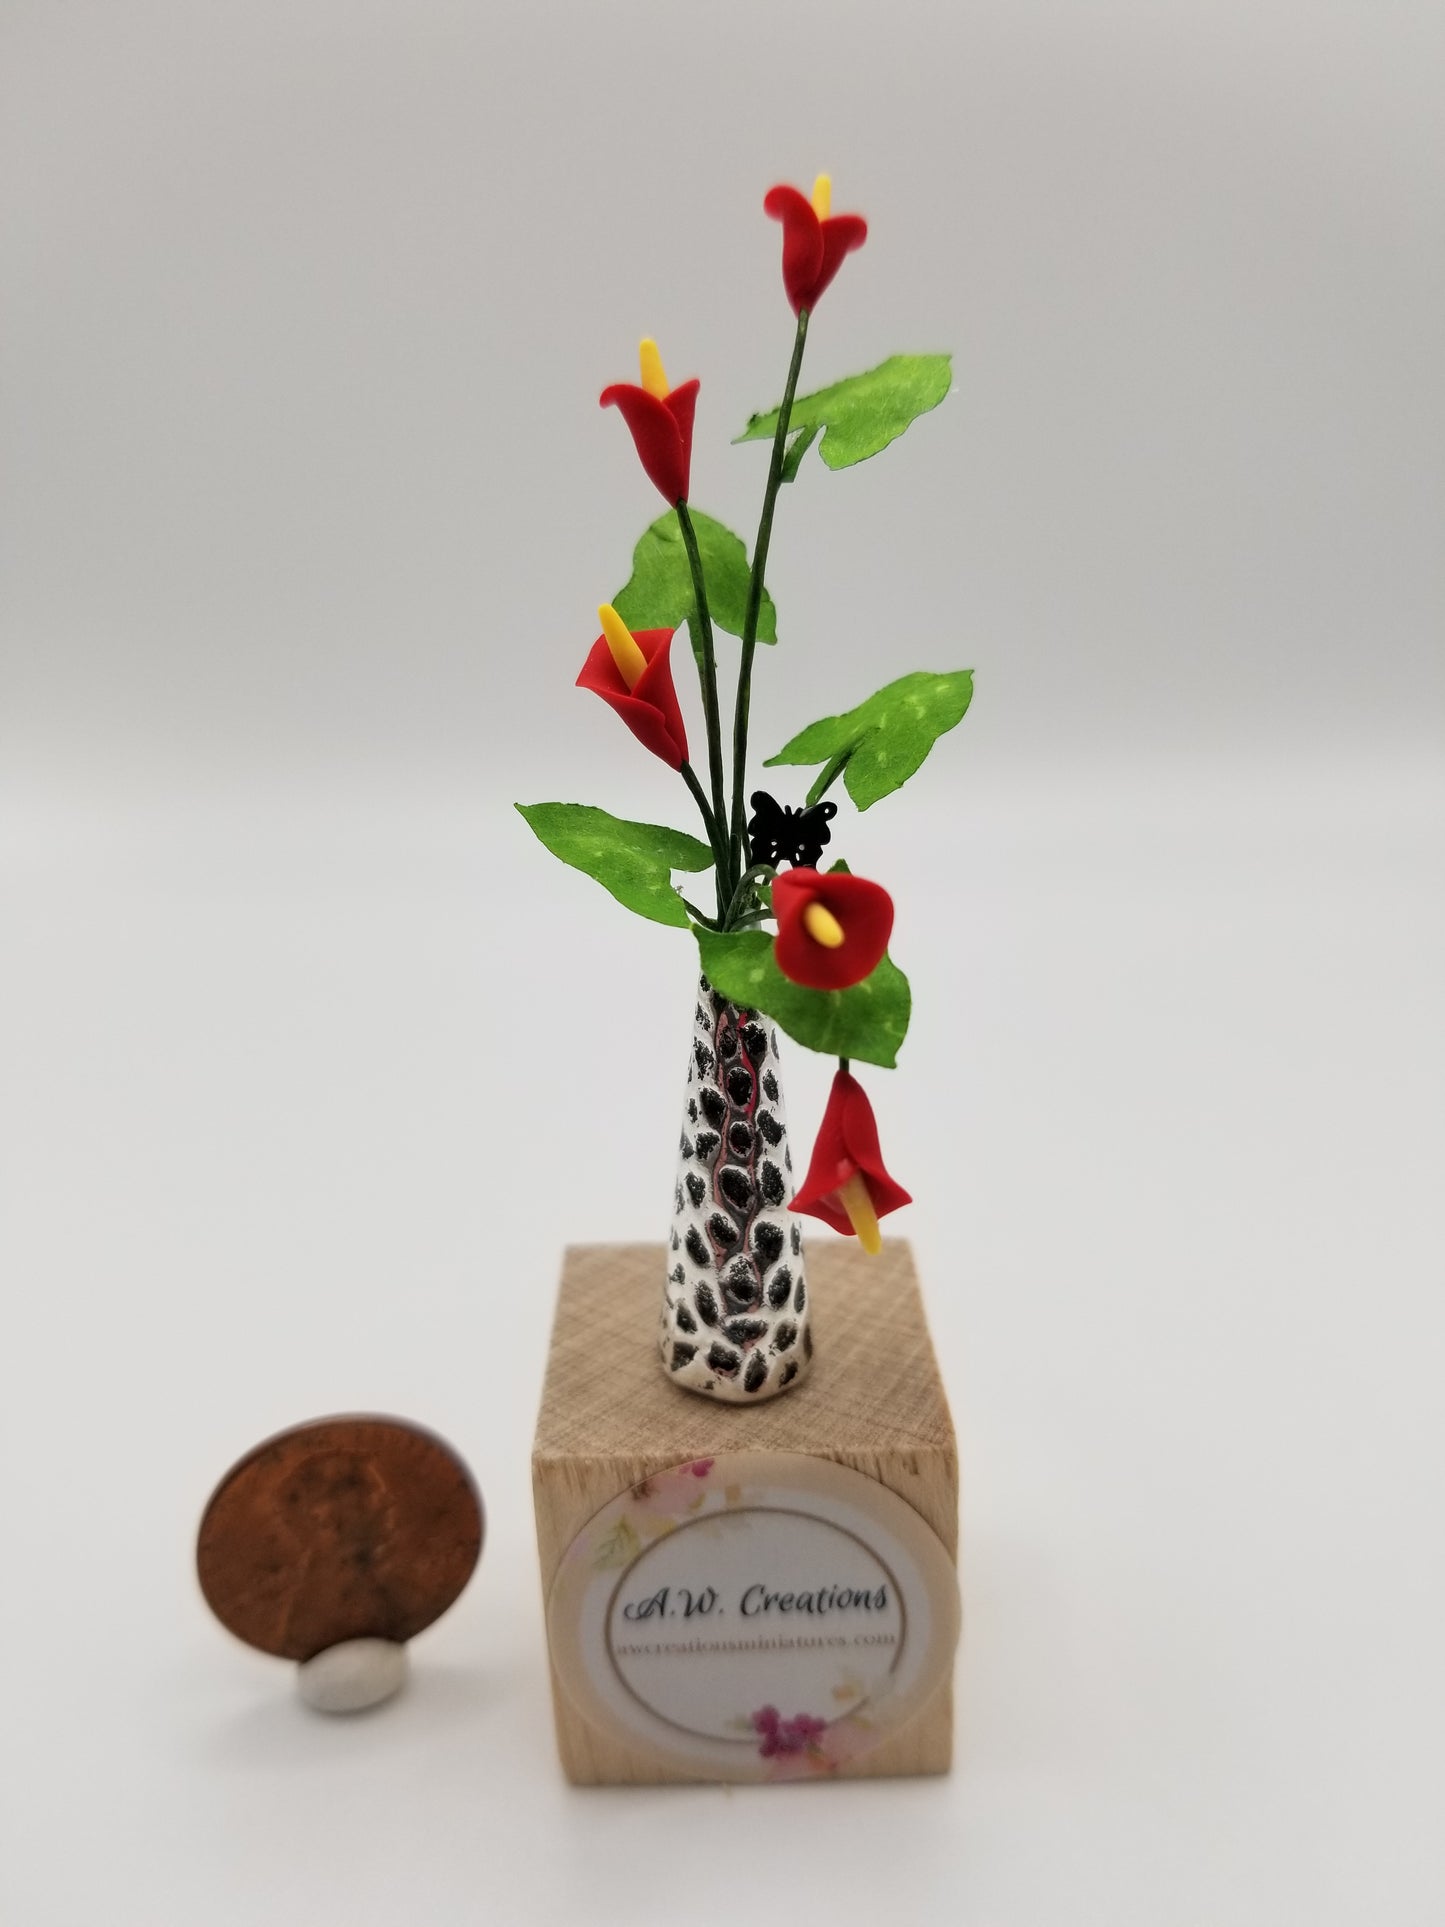 Contemporary flower arrangement - red calla lily